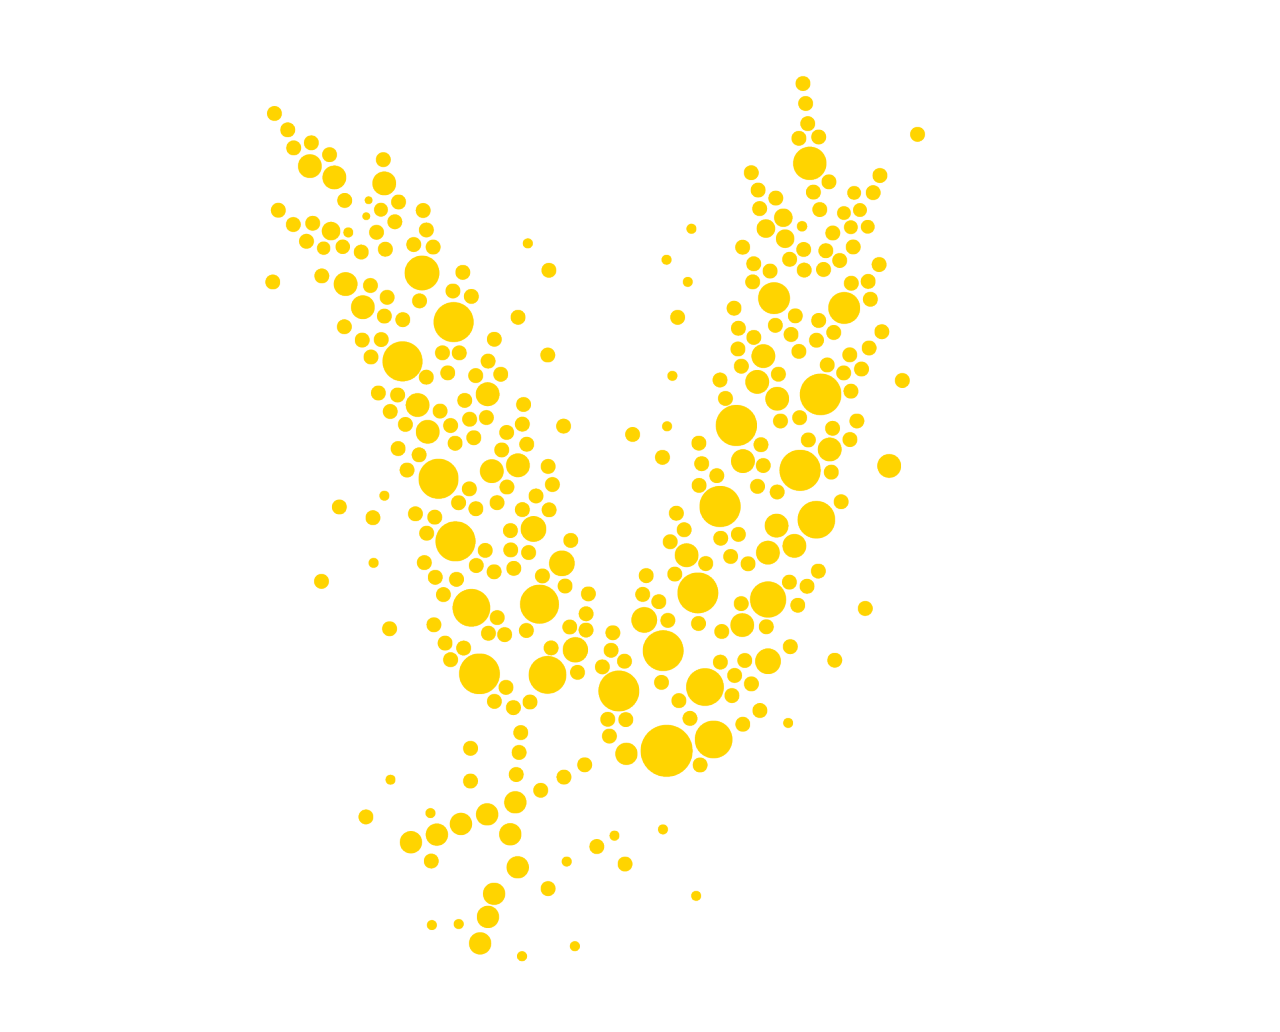 Yellow circles make up the shape of two pieces of barley